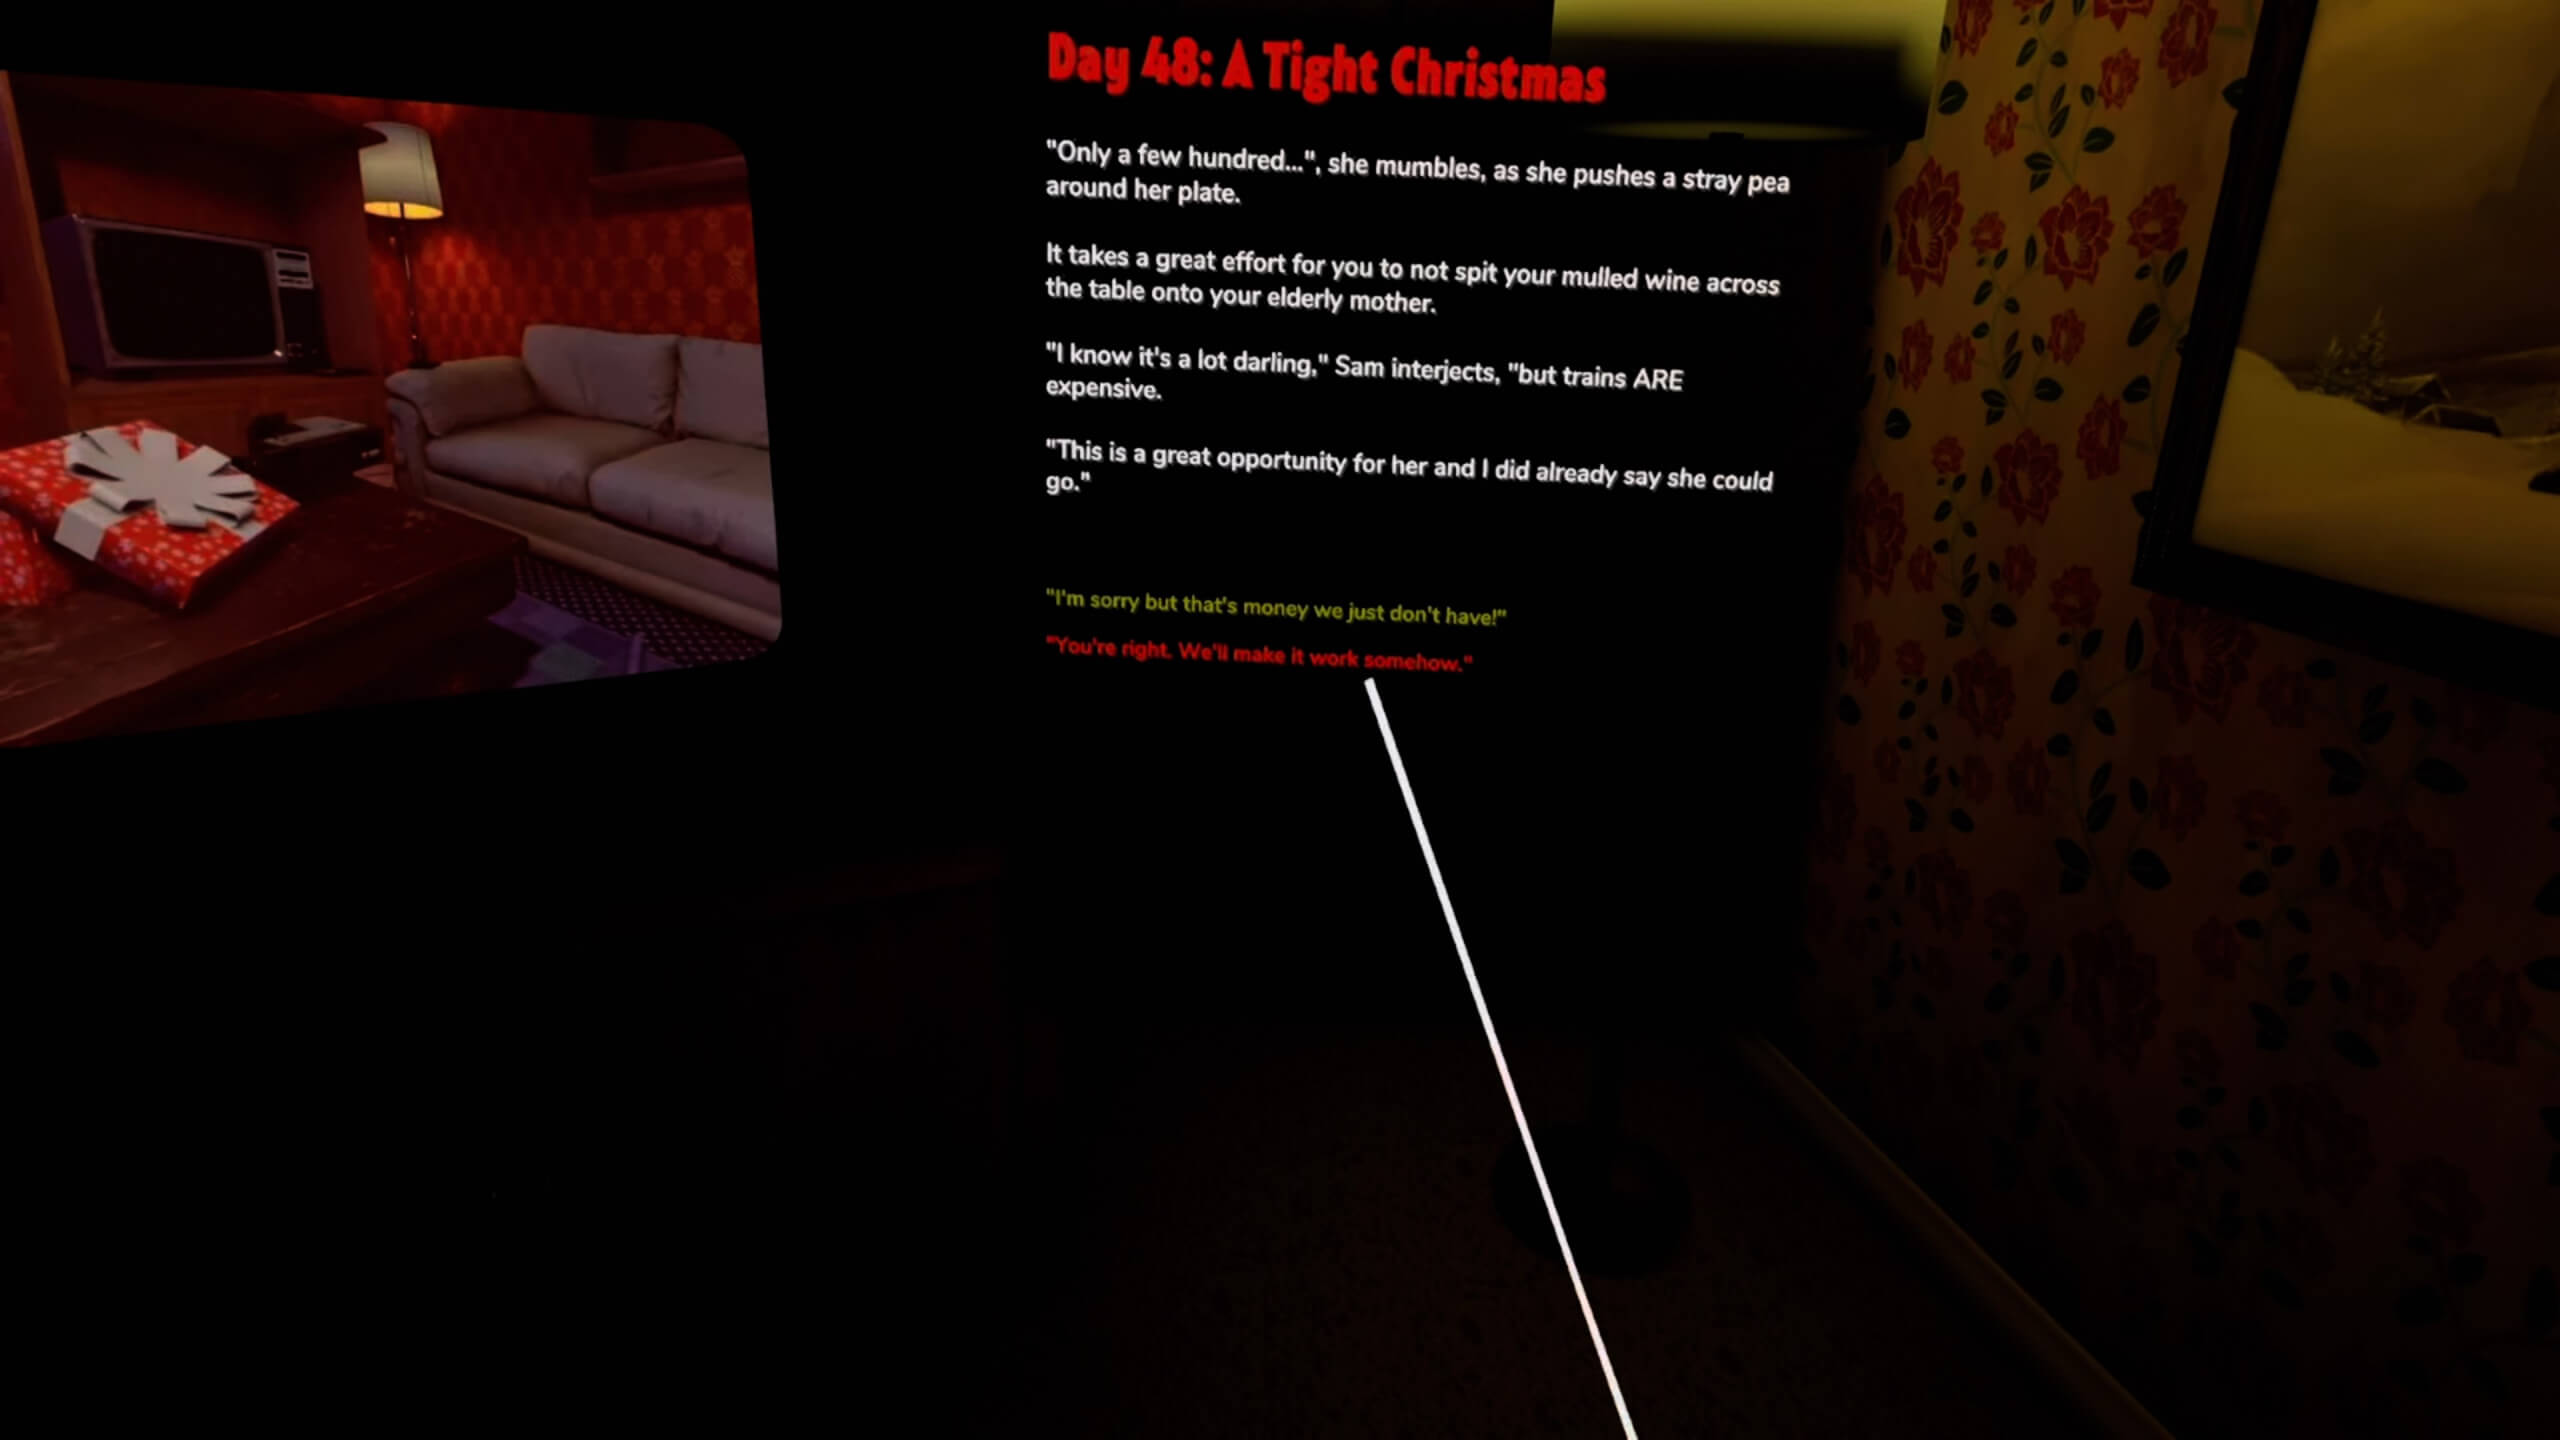 The text based story of the game showing the player make a decision to give out money that will have an impact later on.